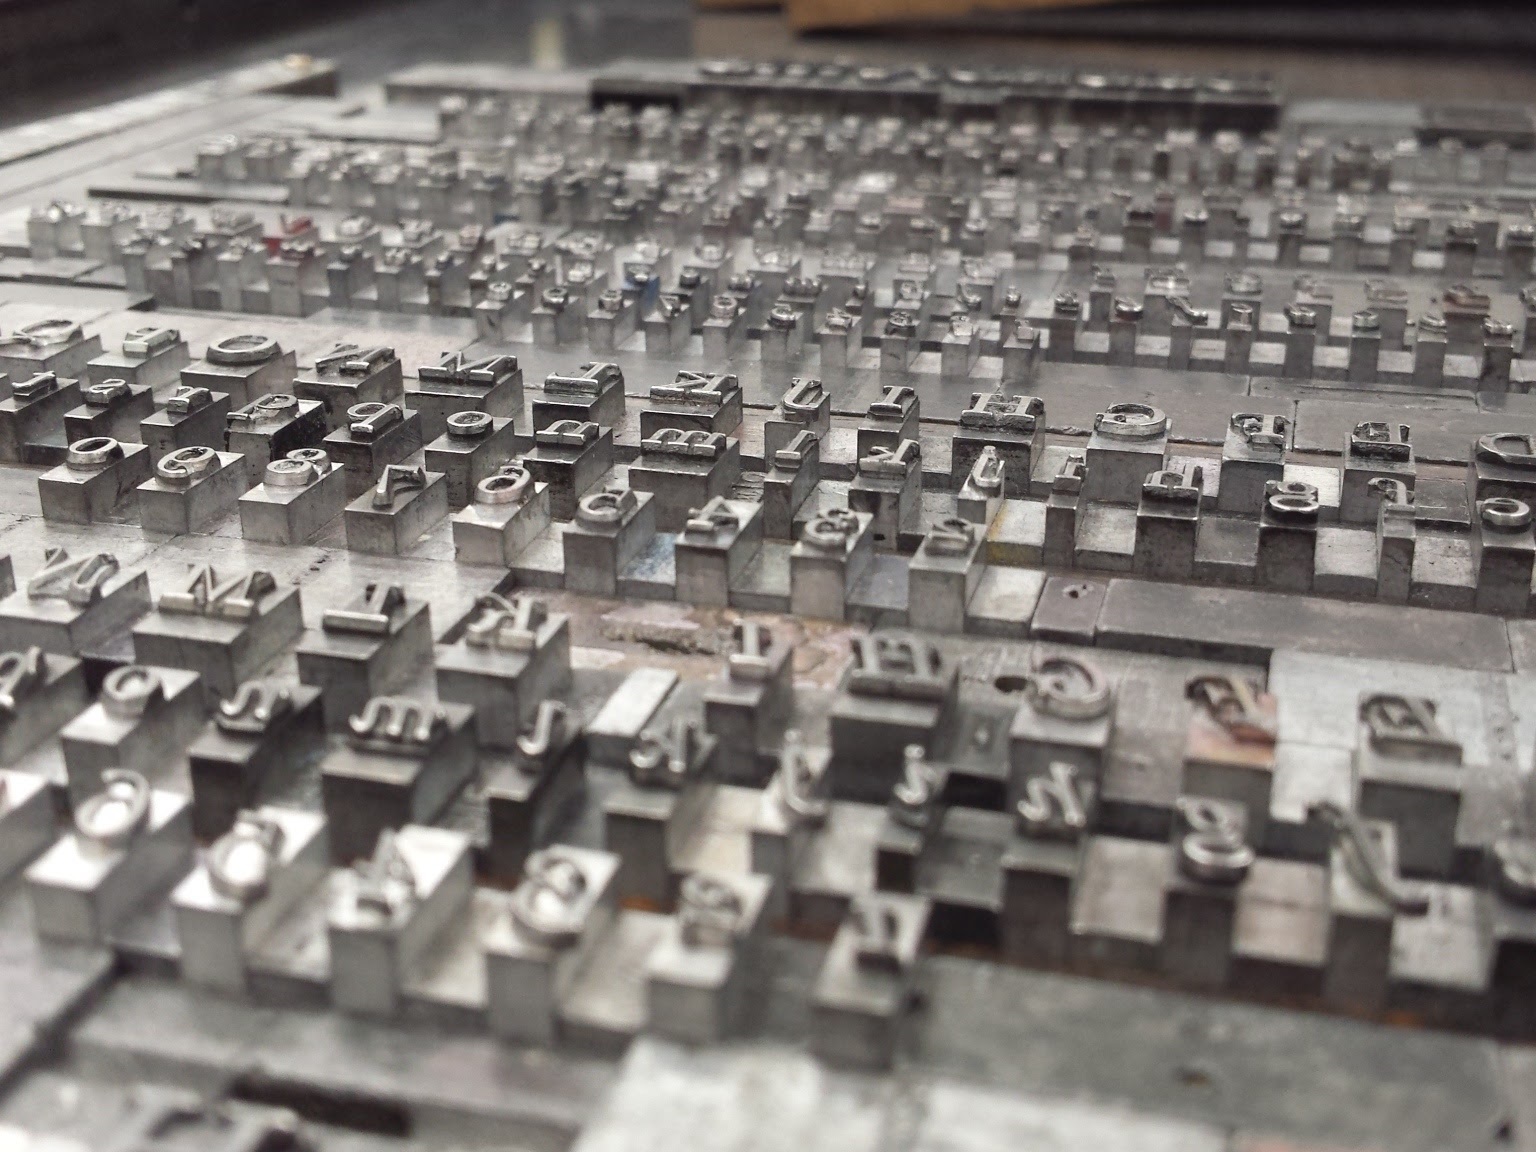 Today was a quiet day at the UWE letterpress studio, so I cracked on with a project I recently started. It might seem a bit too ambitious, but my plan is to print a specimen book of all our letterpress type. We have about 120 cases of lead type, and 90 of the wooden type – so it’s definitely a long term project. But it would make life a lot easier for the students. At the moment they have to look through every case individually while trying to decipher what the minute, inky, reversed letters will look like!